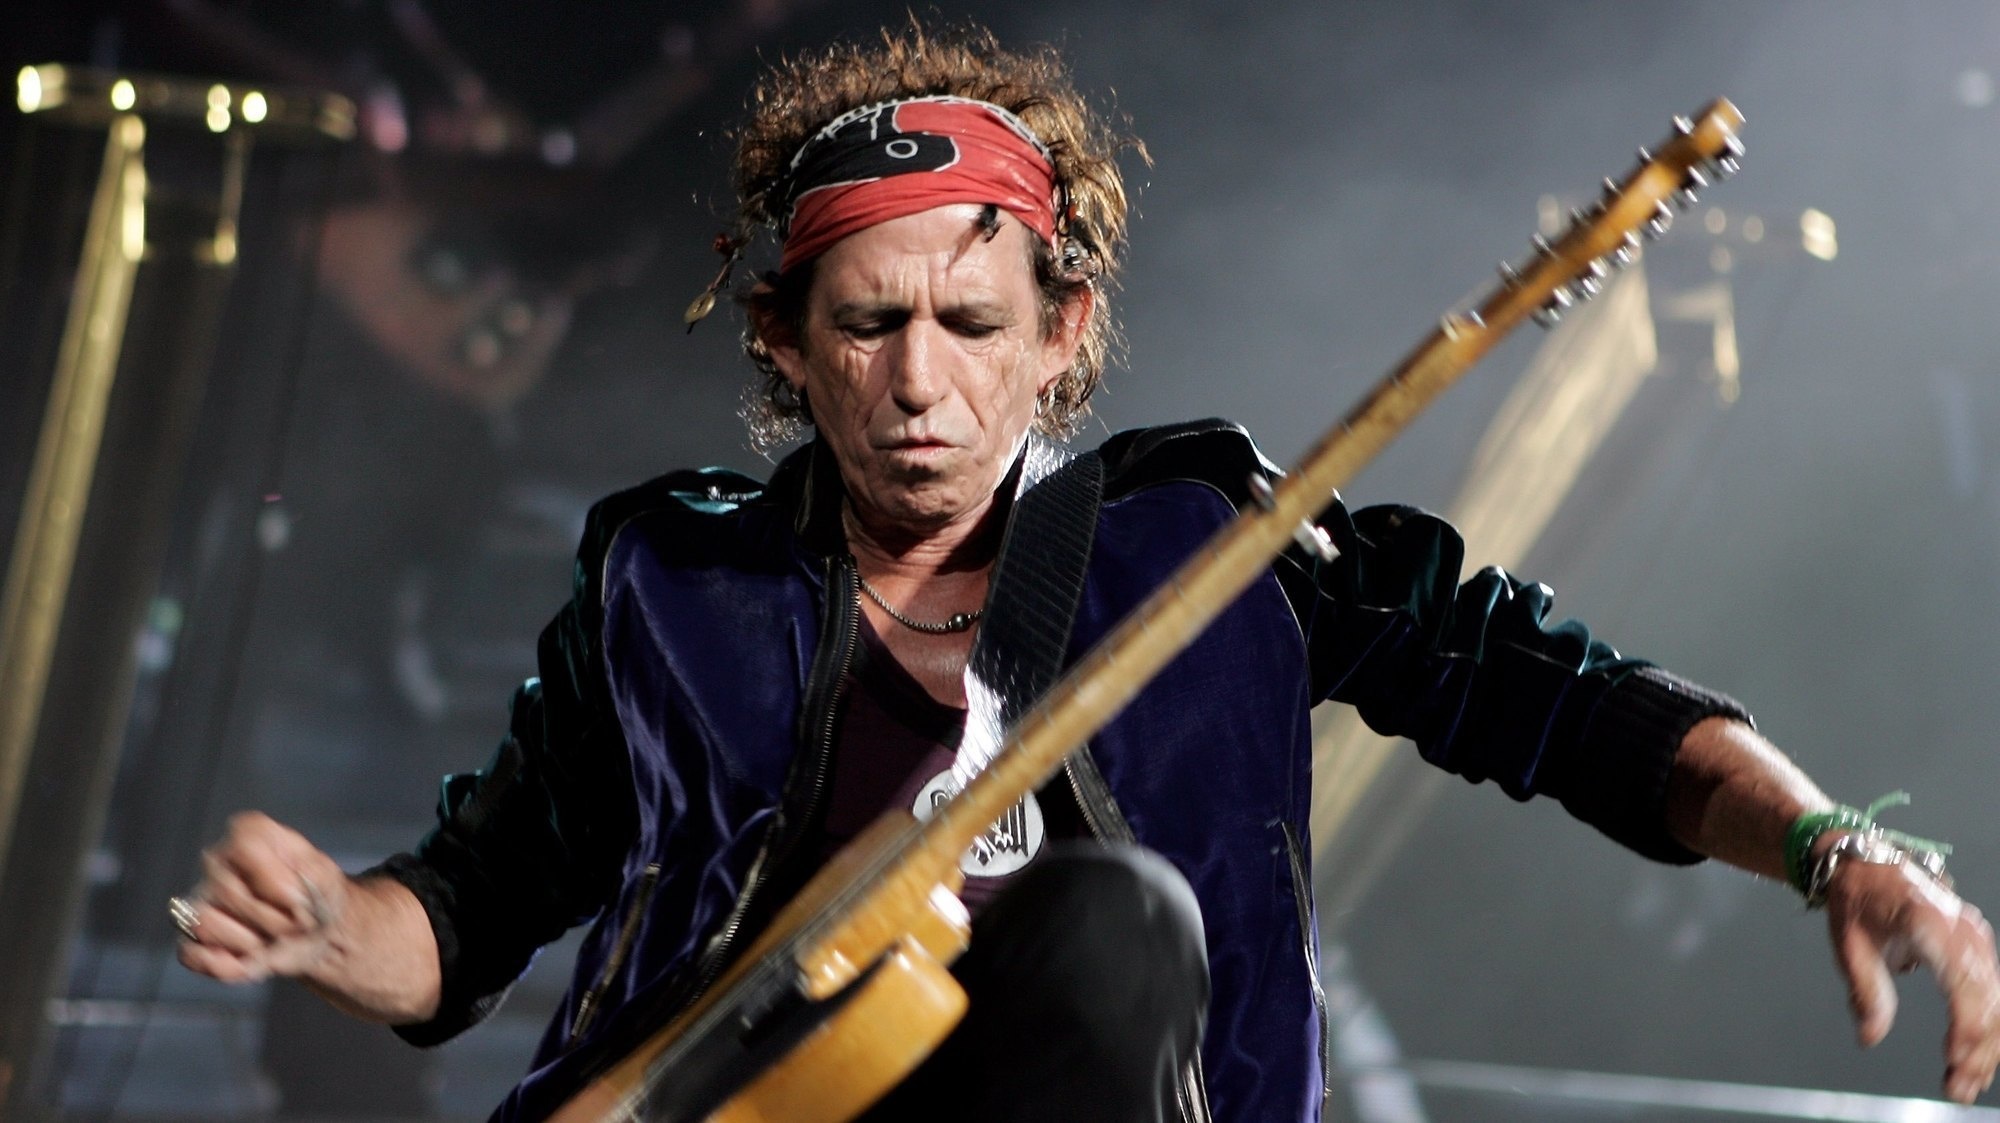 A curious and talented man, Rolling Stones guitarist Keith Richards insured his left middle finger for $1.6 million.